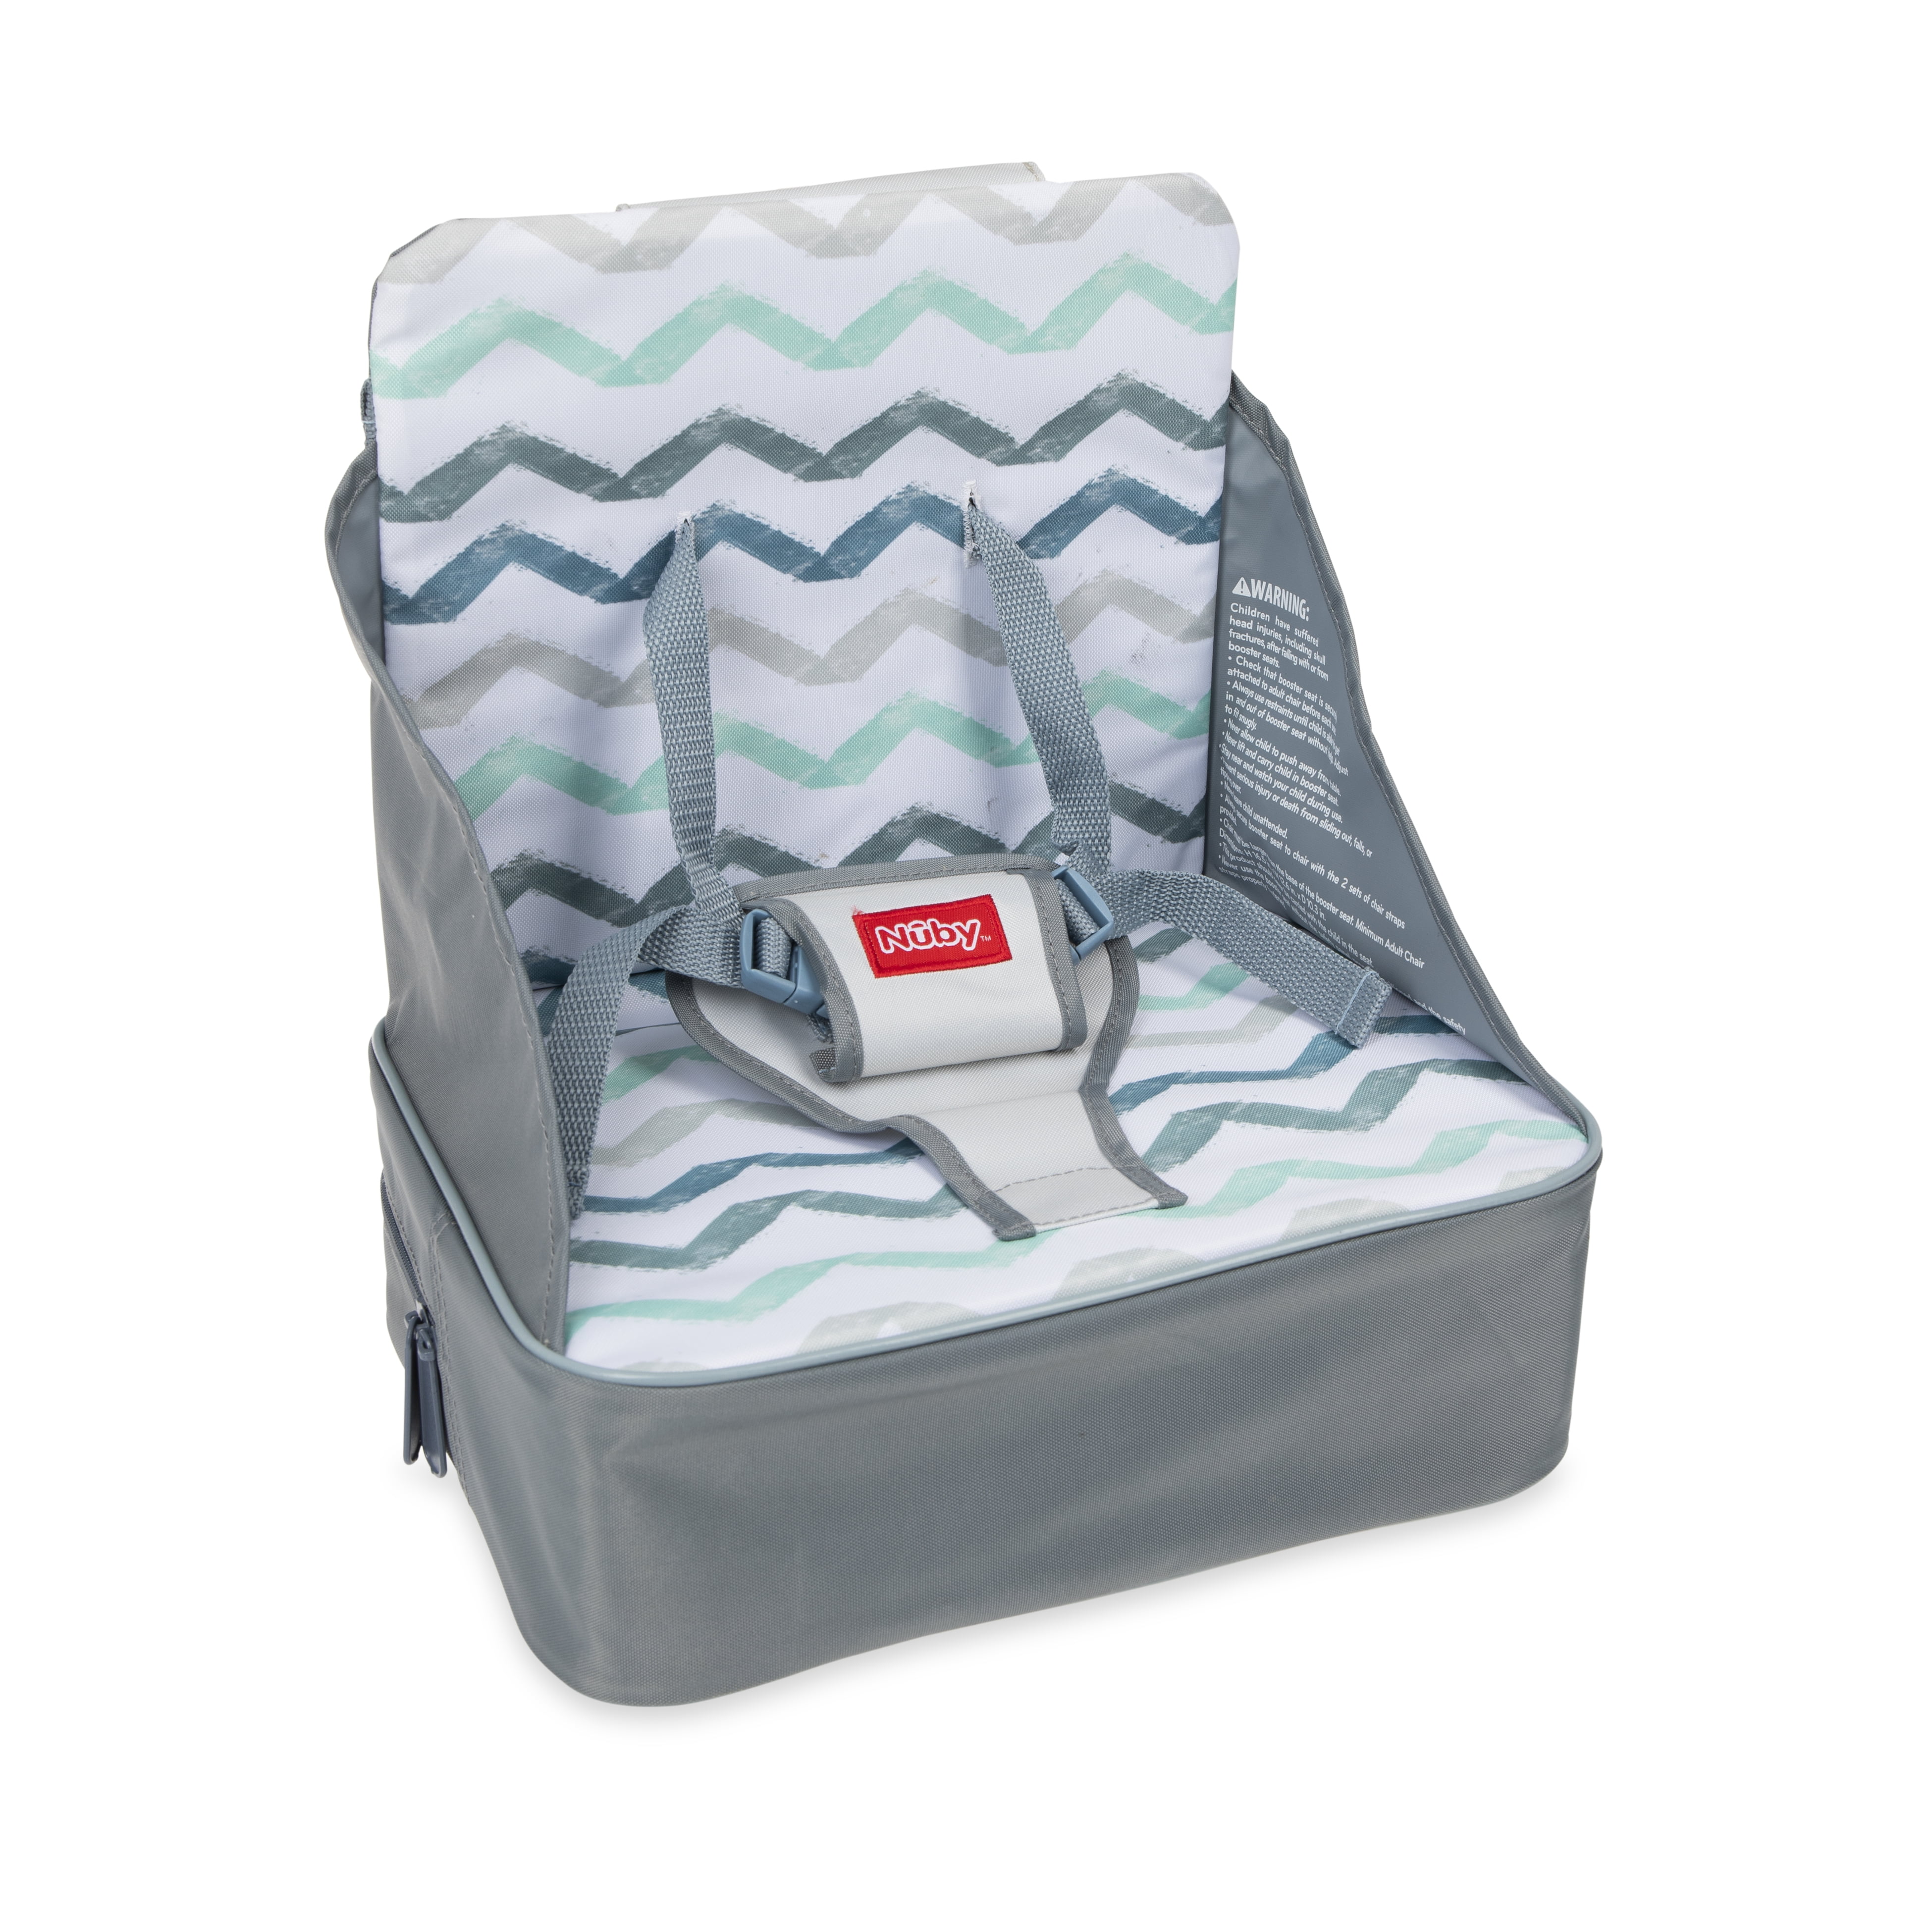 Nuby Easy Go Safety Lightweight High Chair Booster Seat Chevron Great for Travel 